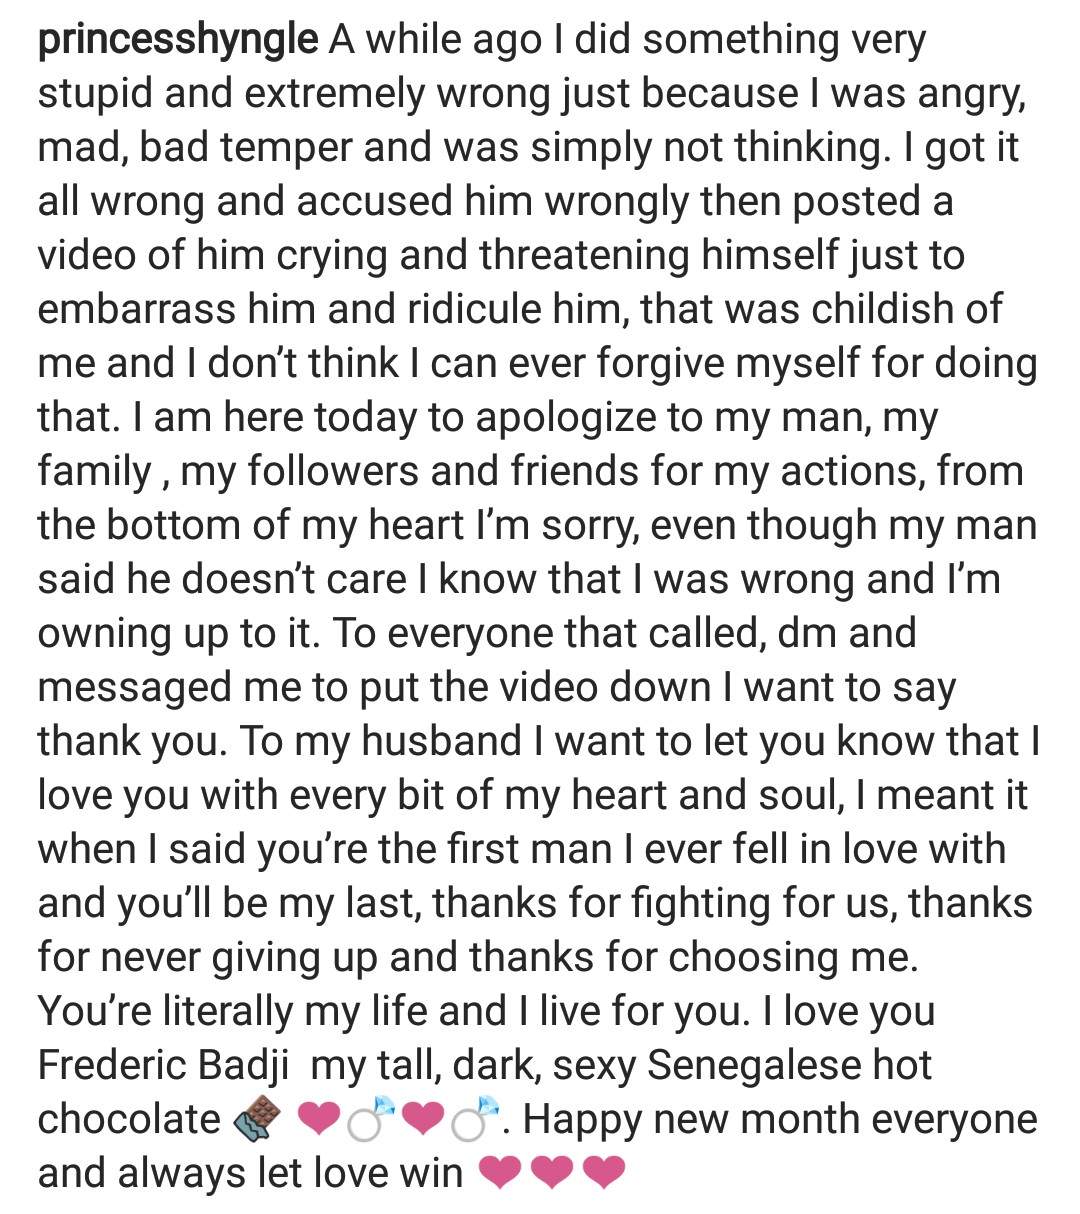 'I did something very wrong and stupid'- Princess Shyngle writes apology letter to her boyfriend